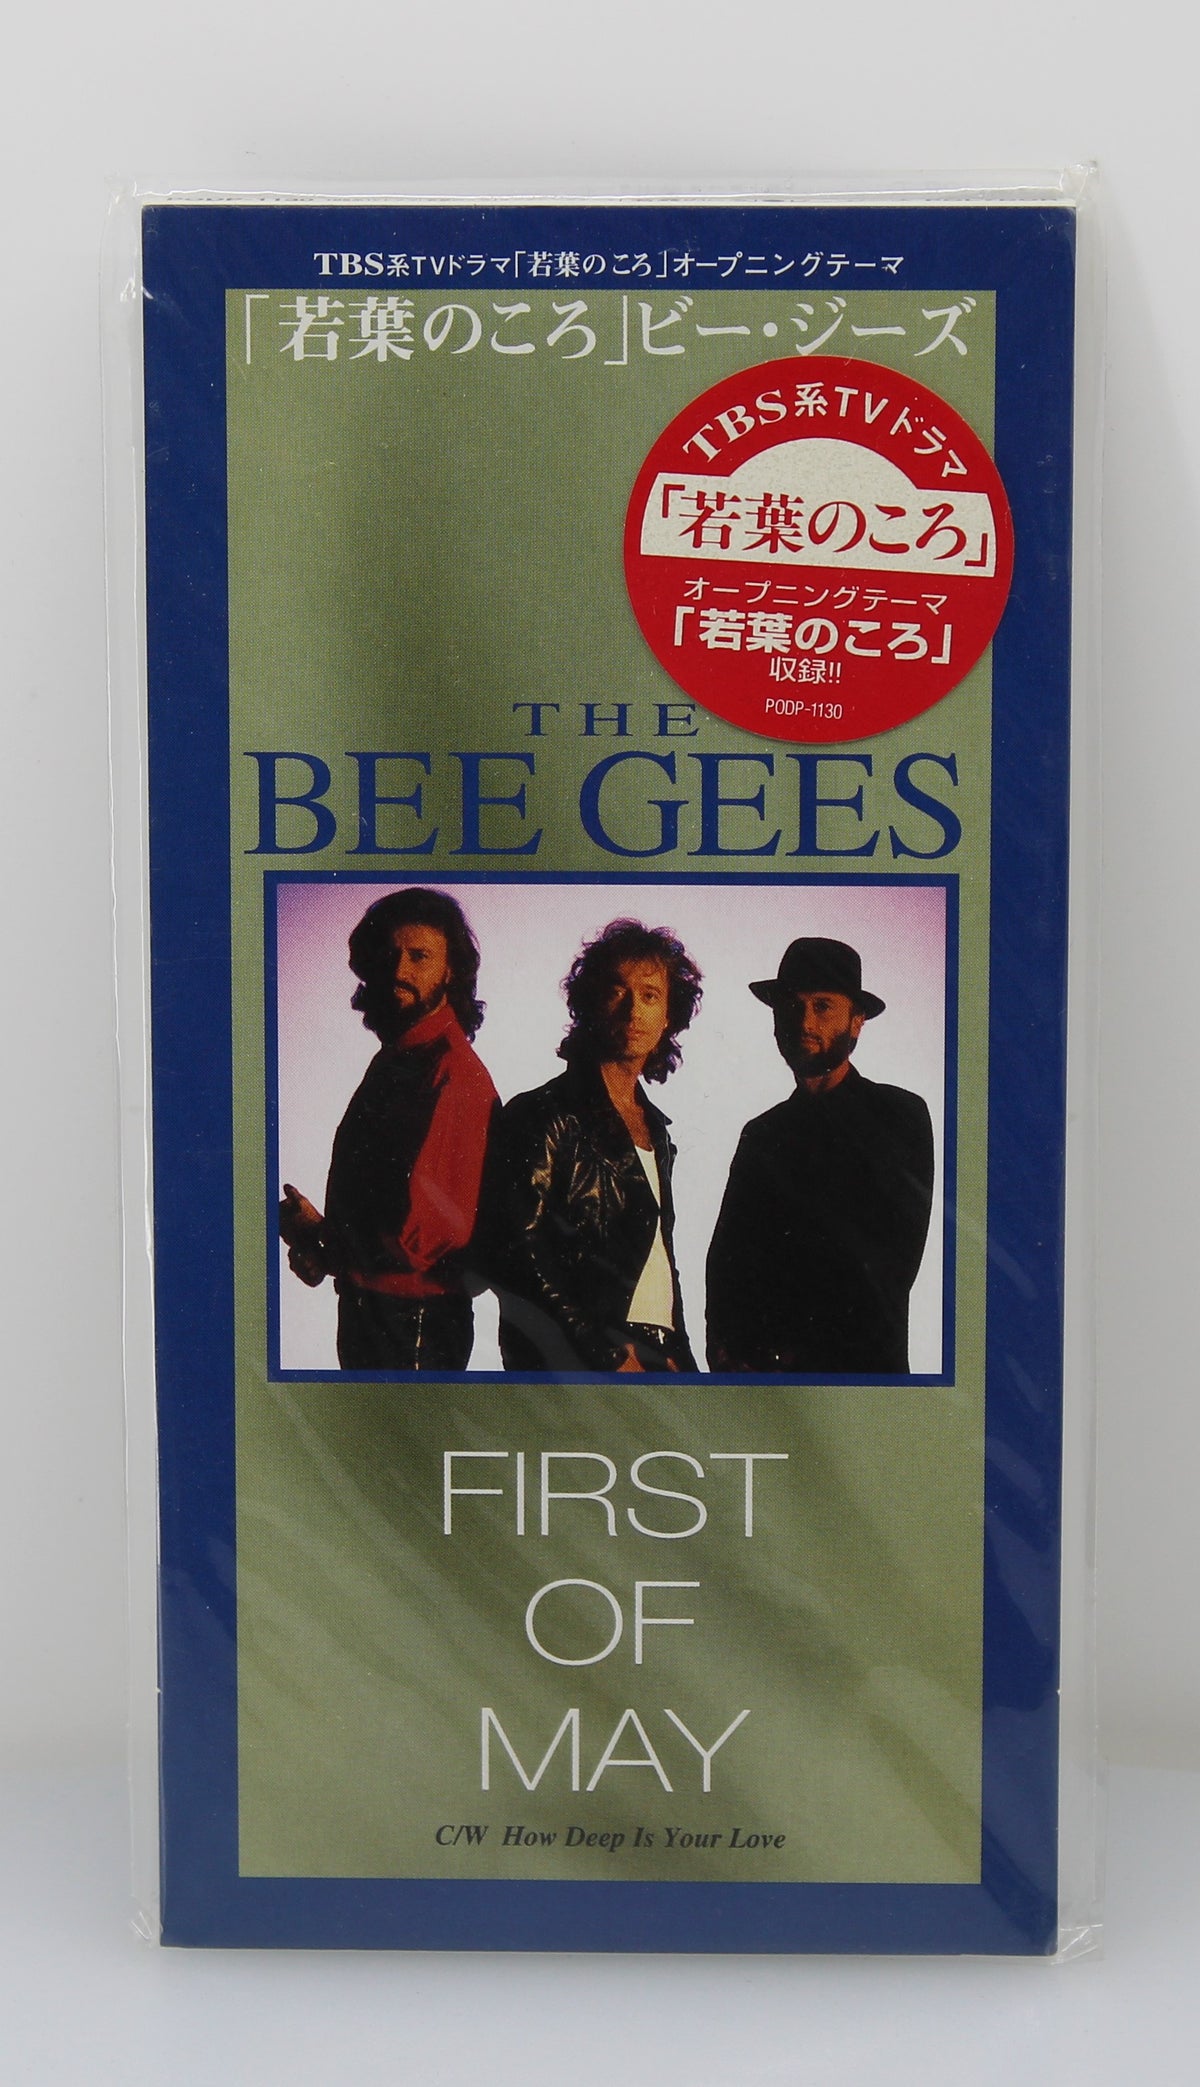 Bee Gees – First Of May, CD, Single, Mini, Japan 1996